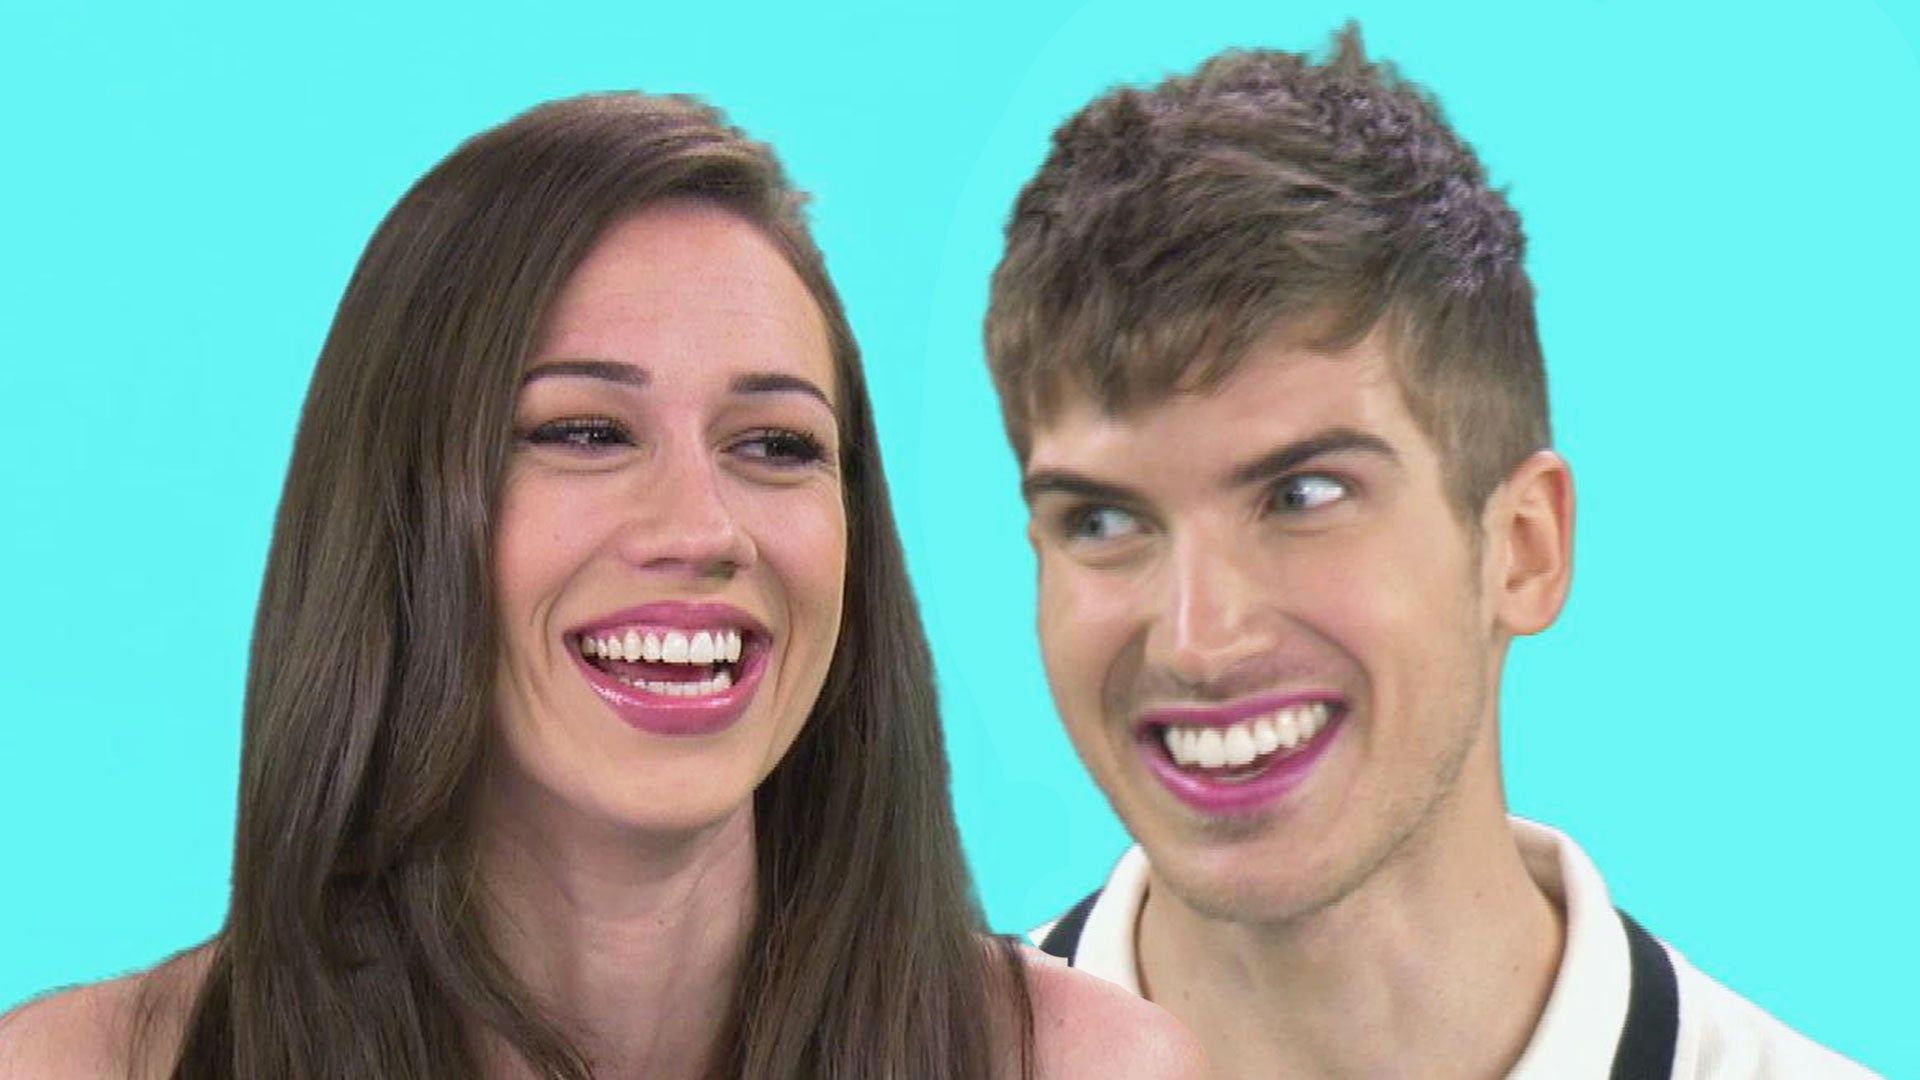 Why Joey Graceffa and Colleen Ballinger Agree Killing in 'Escape